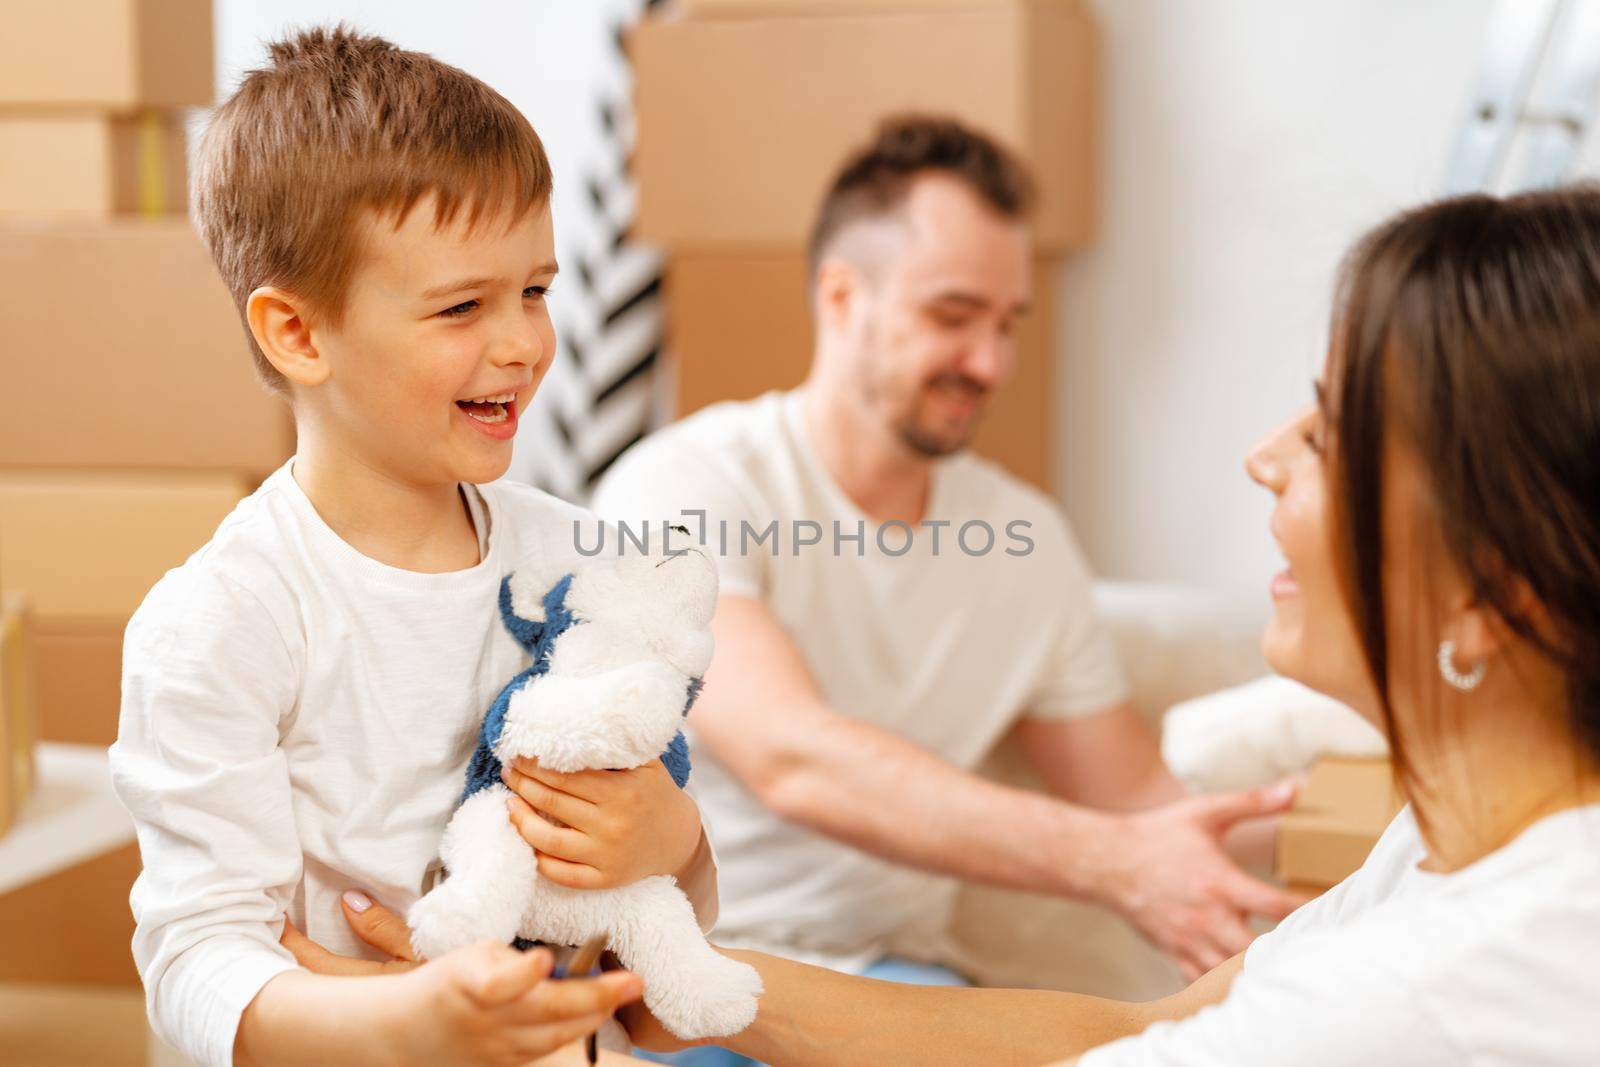 Portrait of happy family with cardboard boxes in new house at moving day by Fabrikasimf